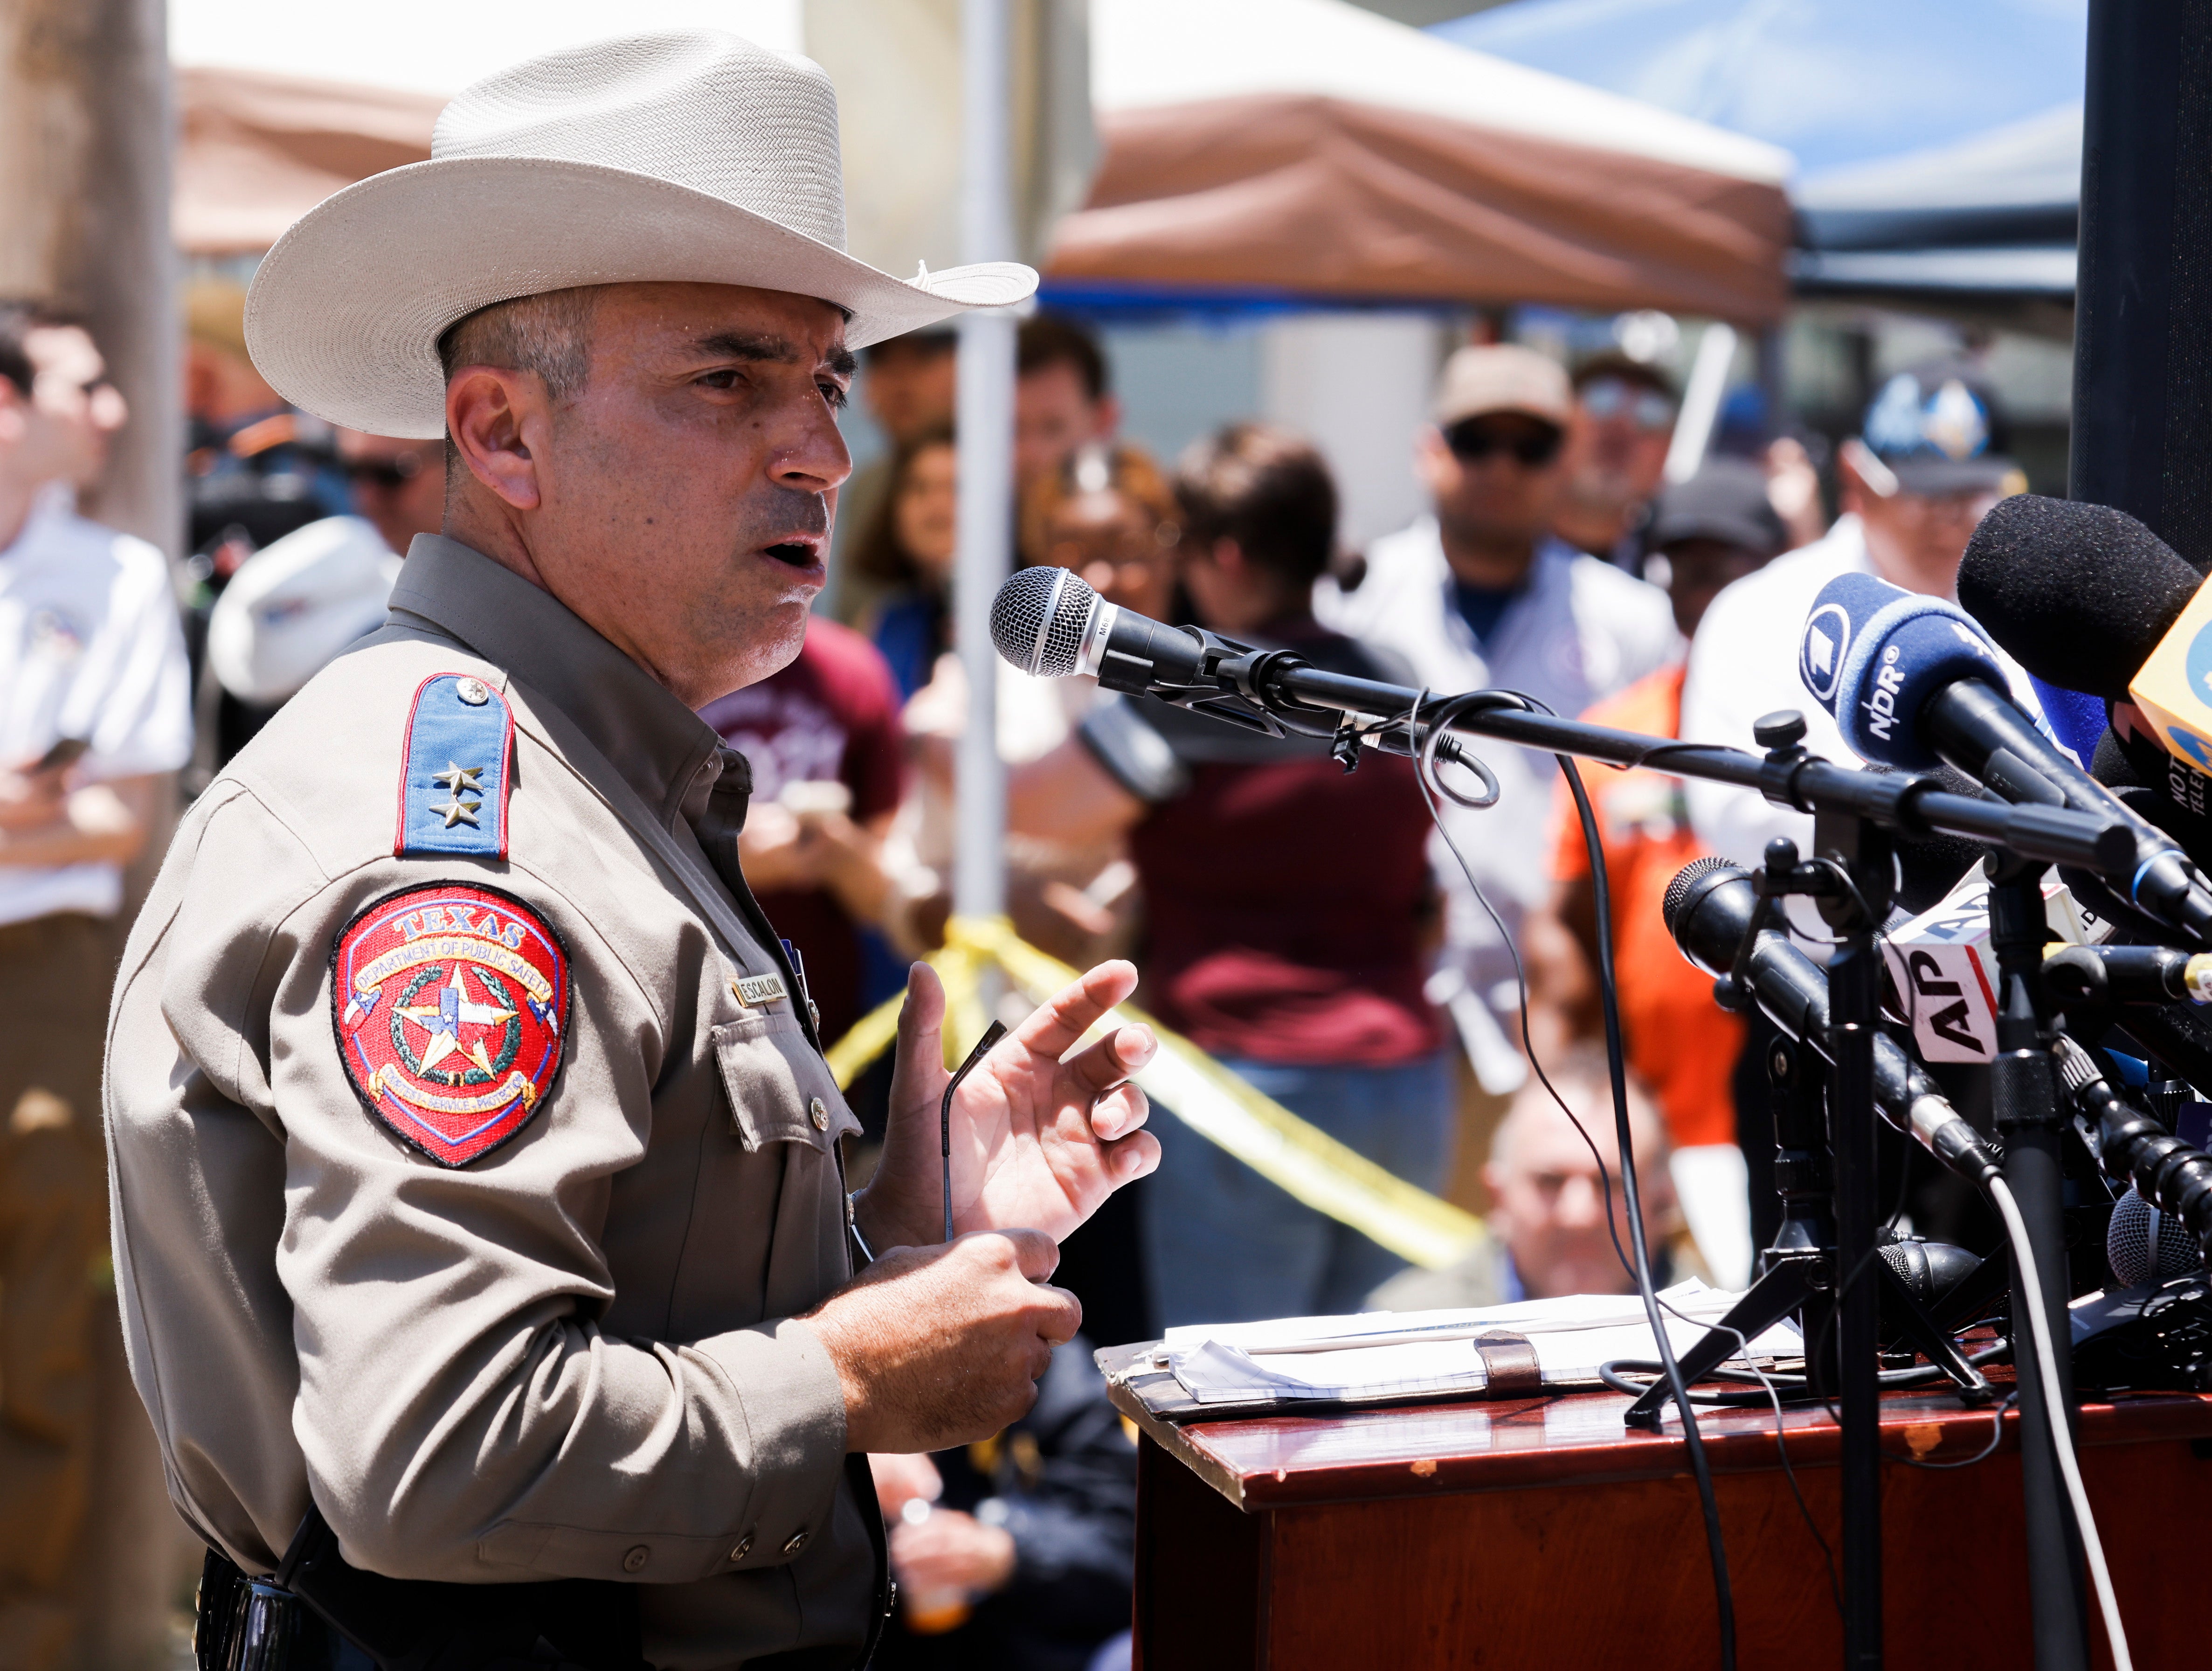 Texas Department of Public Safety South Regional Director Victor Escalon gives an update into the investigation following a mass shooting at the Robb Elementary School in Uvalde, Texas, USA, 26 May 2022. According to Texas officials, at least 19 children and two adults were killed in the shooting on 24 May. The eighteen-year-old gunman was killed by responding officers. EPA/TANNEN MAURY